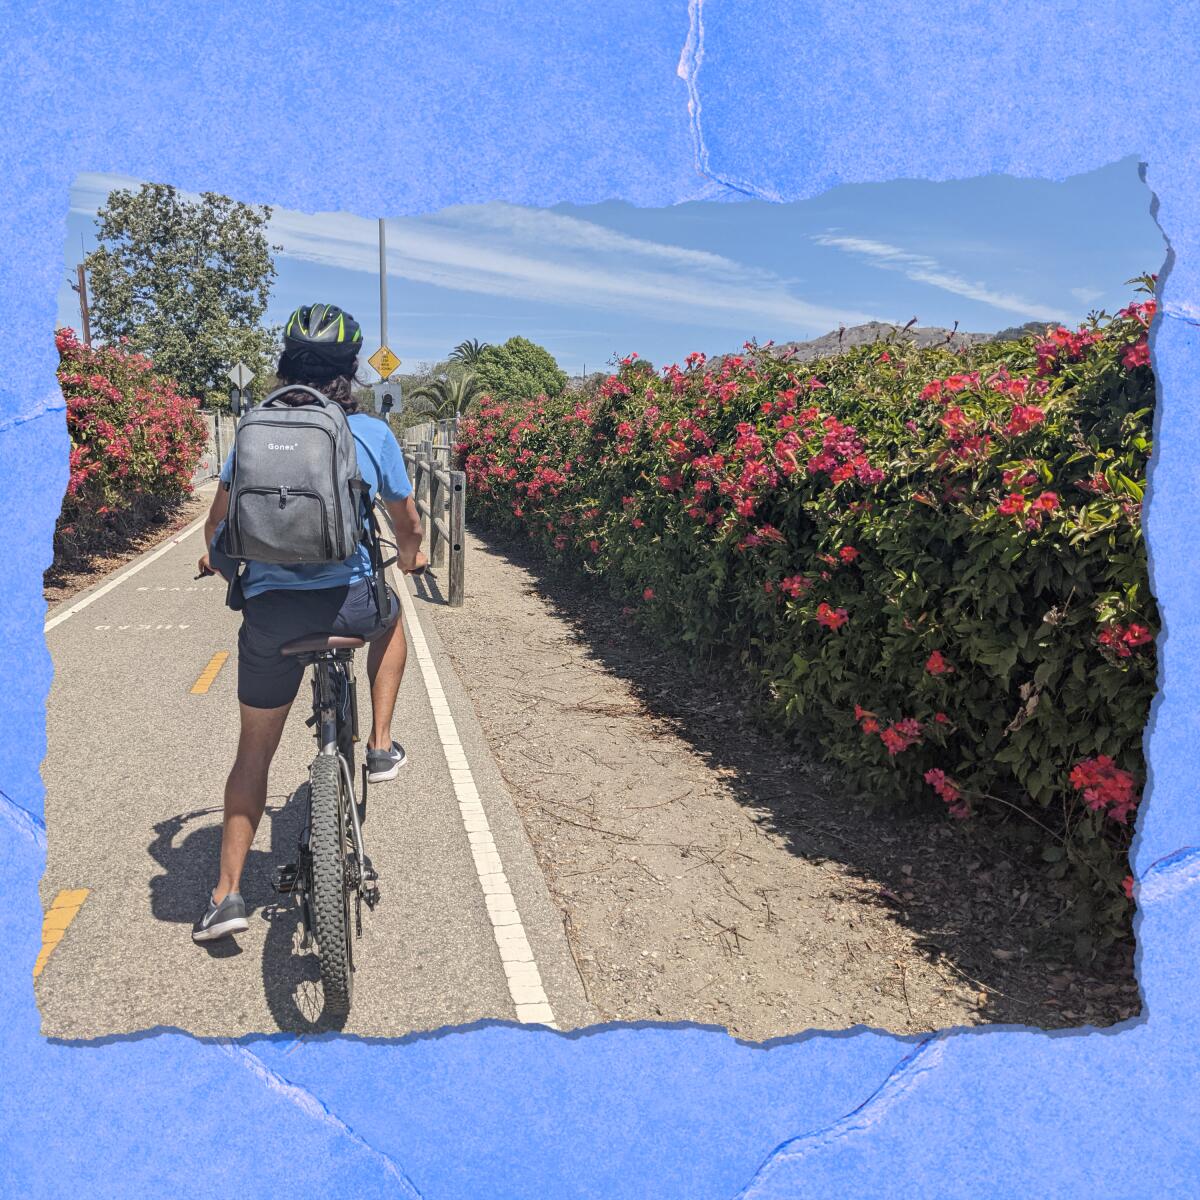 A person is seen from behind riding a bike on a concrete path next to bushes of bougainvillea.